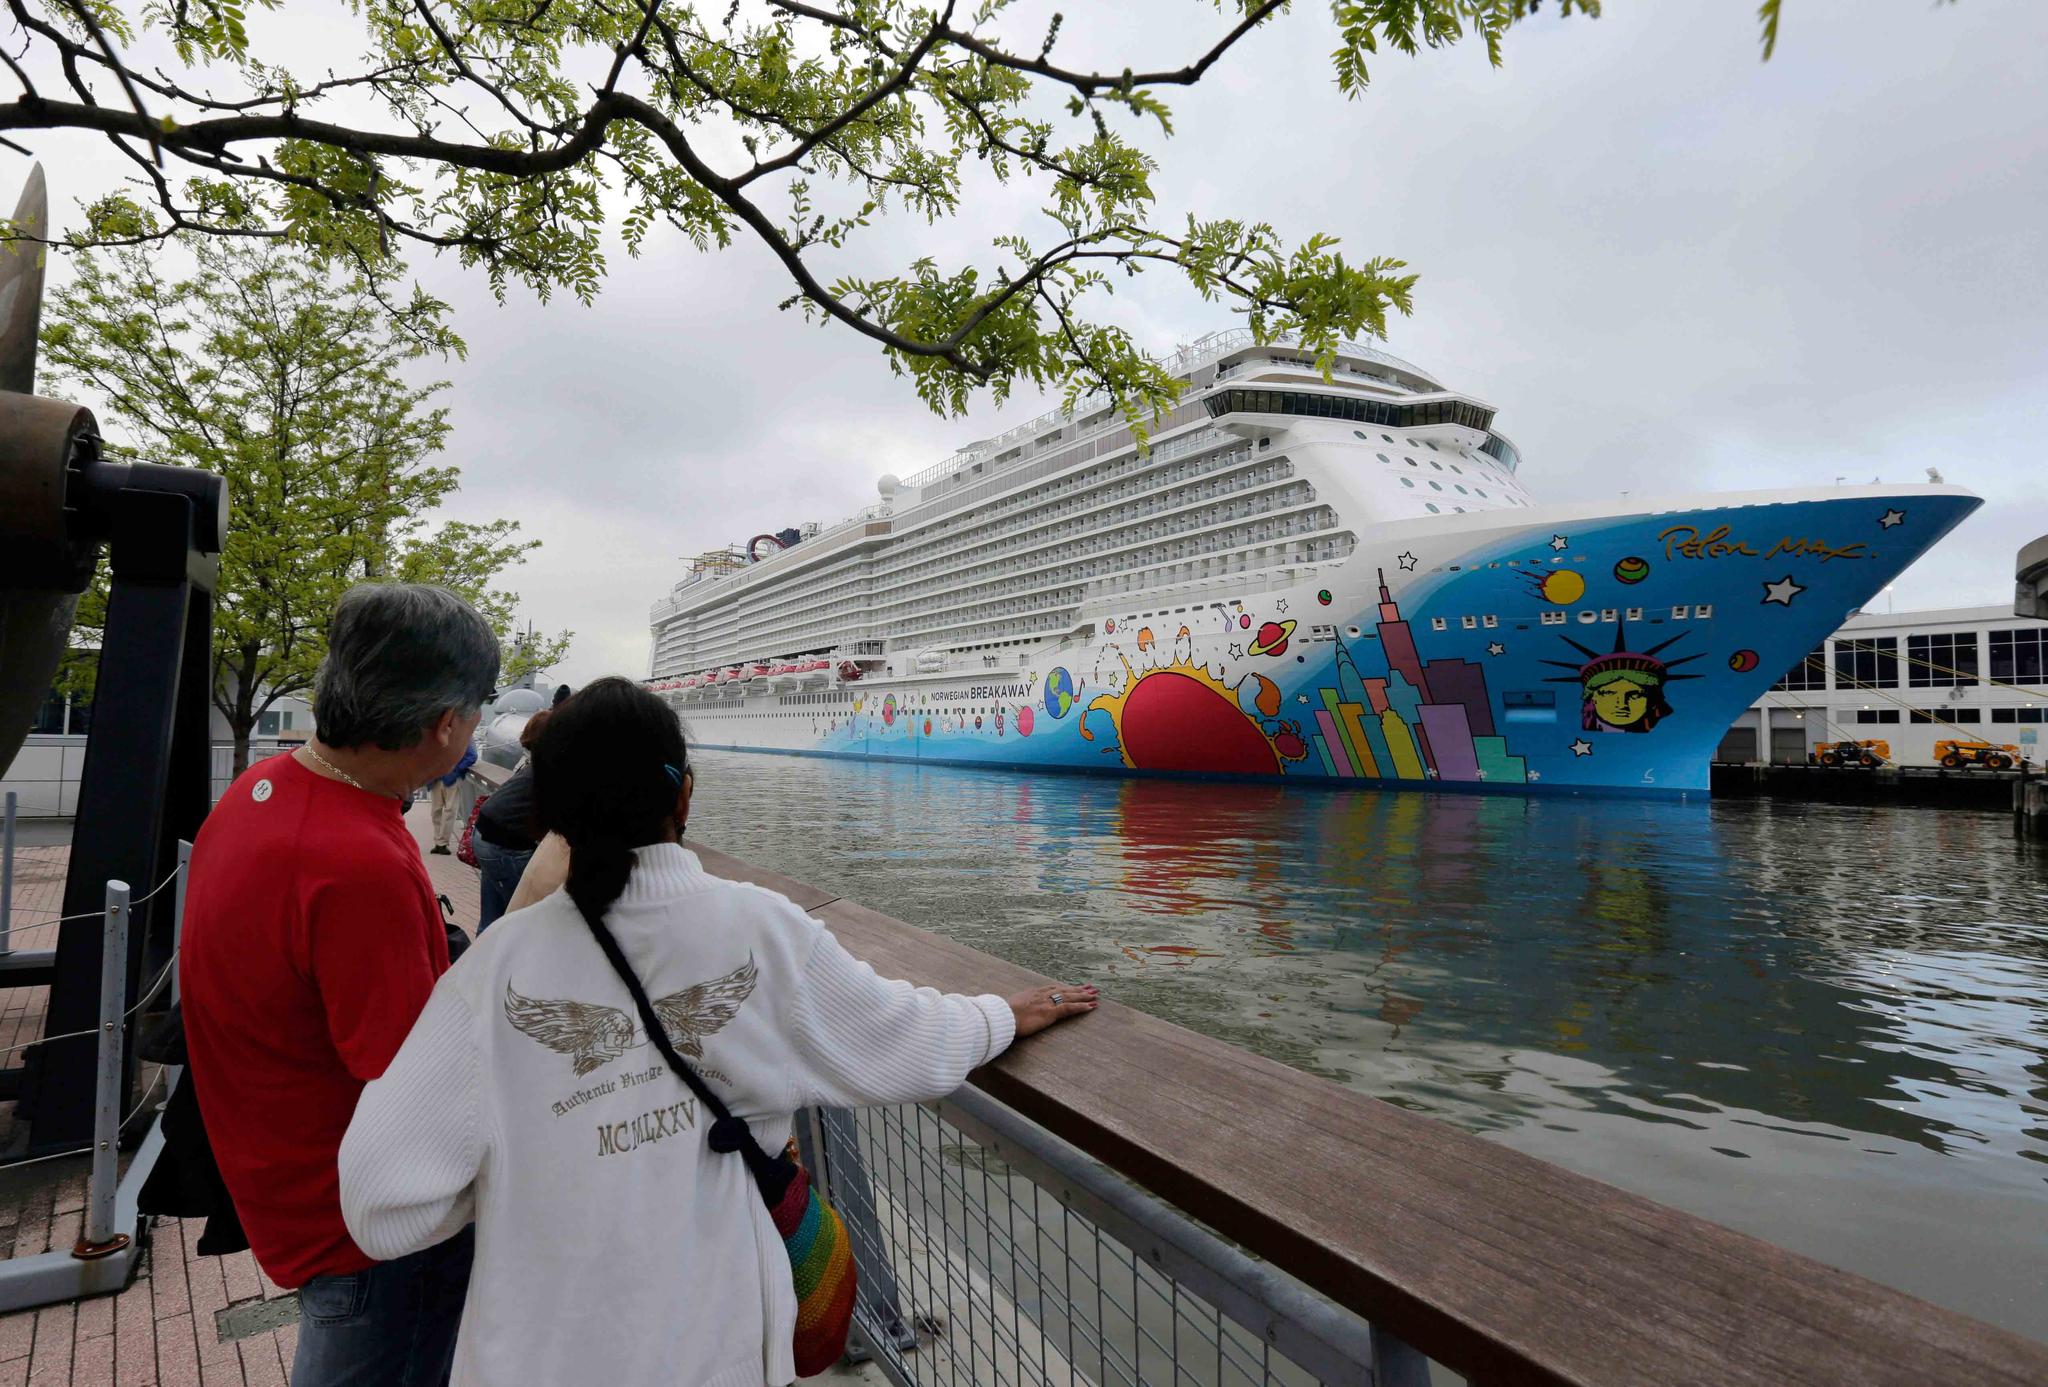 People pause to look at Norwegian Cruise Line's ship, Norwegian Breakaway, on the Hudson River, in New York, on May 8, 2013.